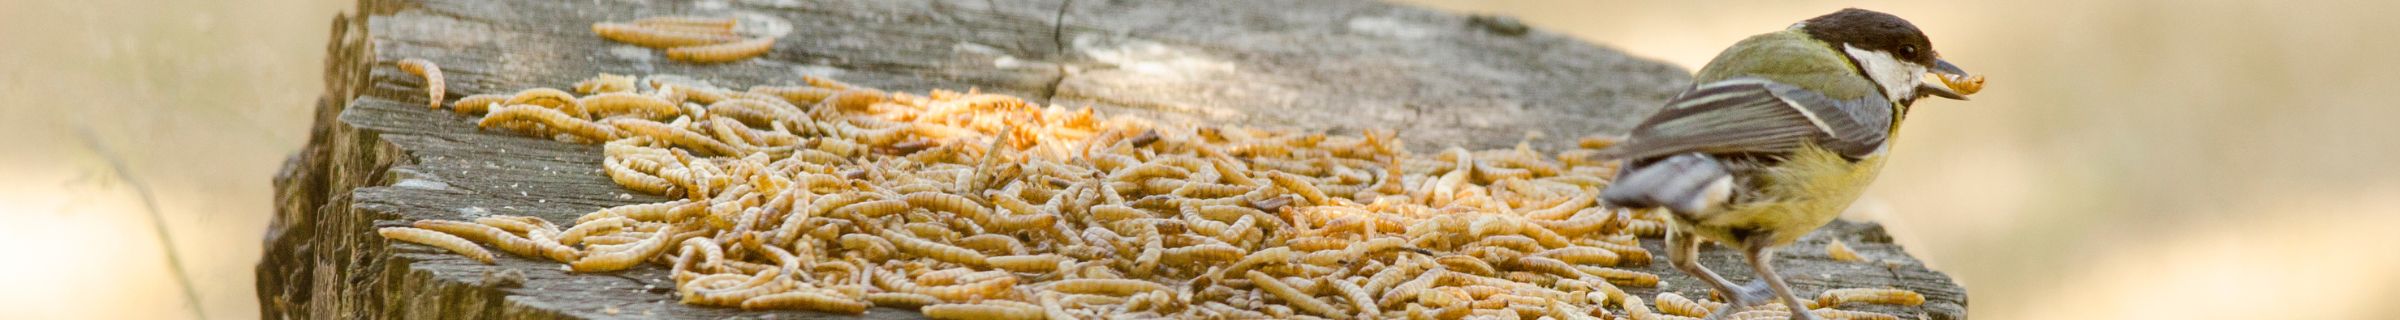 mealworms are naturally rich in protein